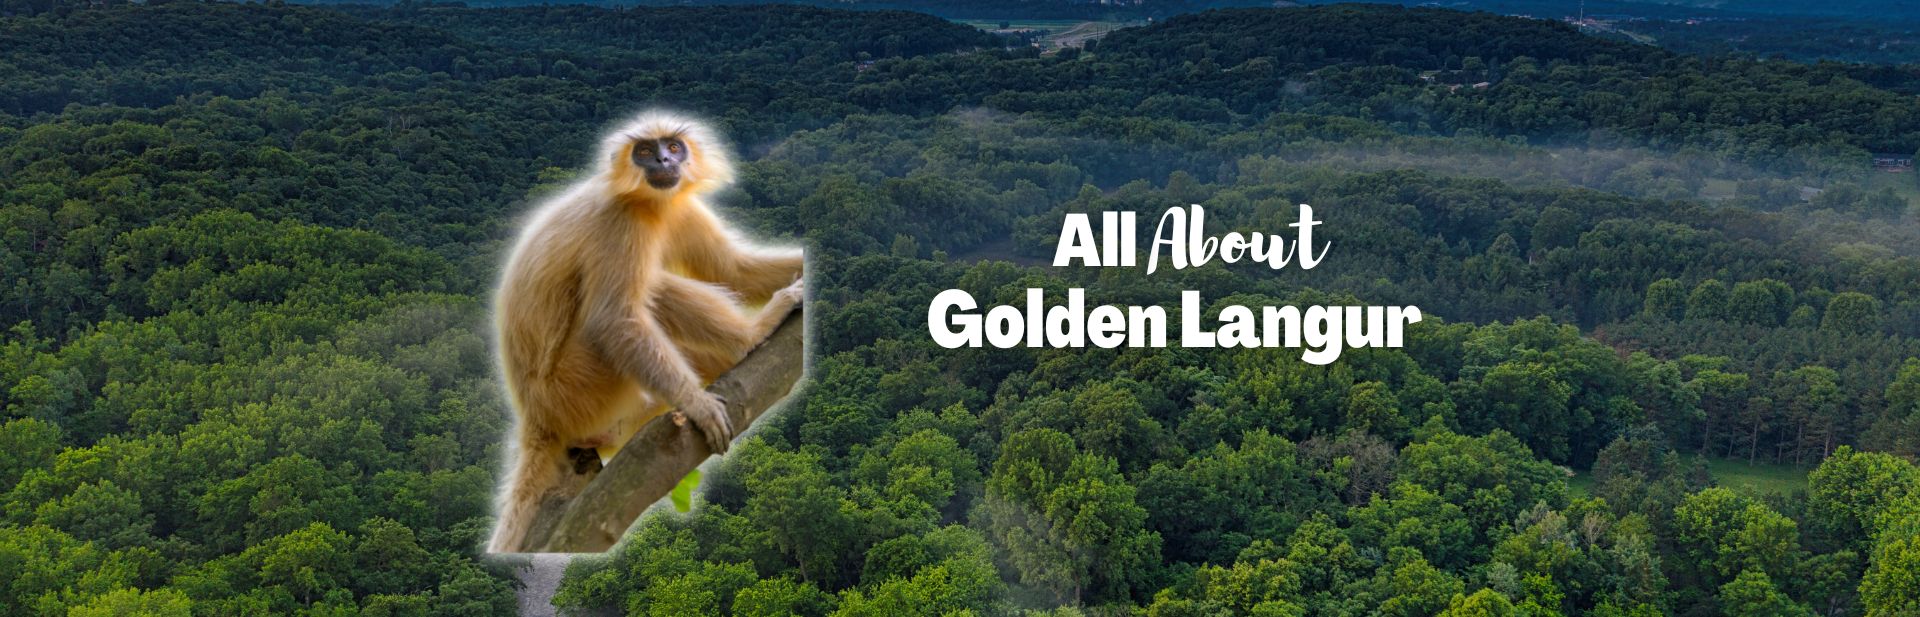 Golden Langur: The Unique and Critically Endangered Primate